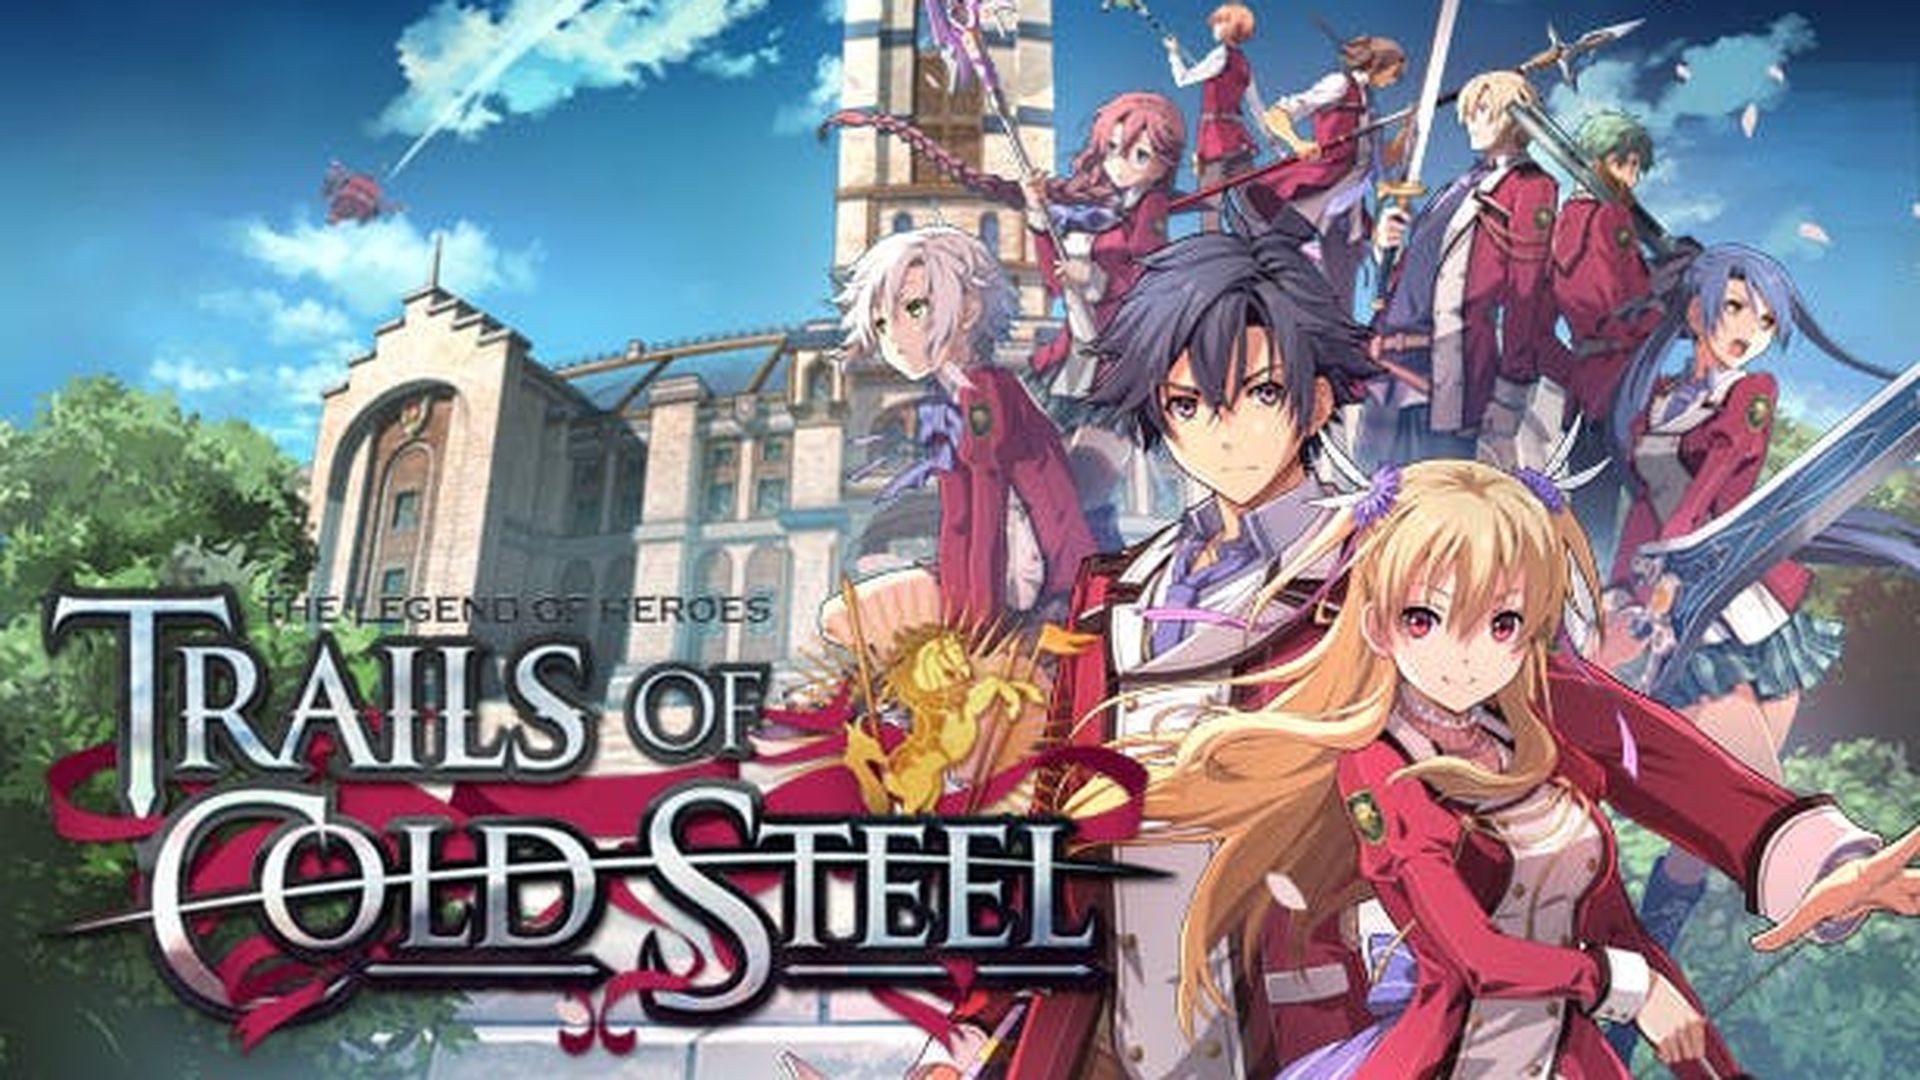 The Legend of Heroes: Trails of Cold Steel I & II confirmed